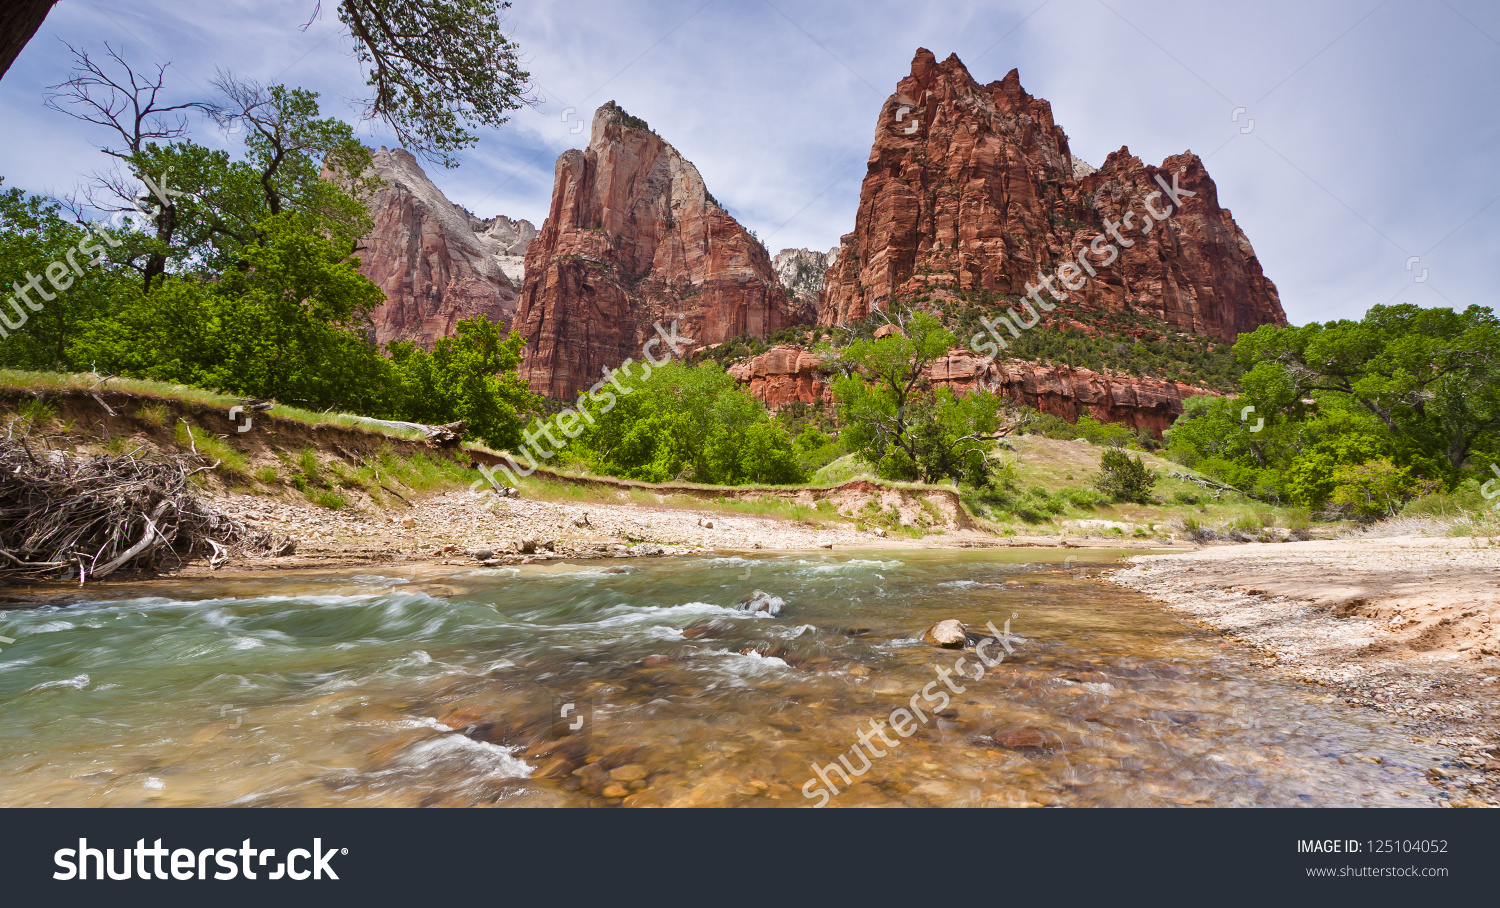 Court Of The Patriarchs And Virgin River In Zion National Park.